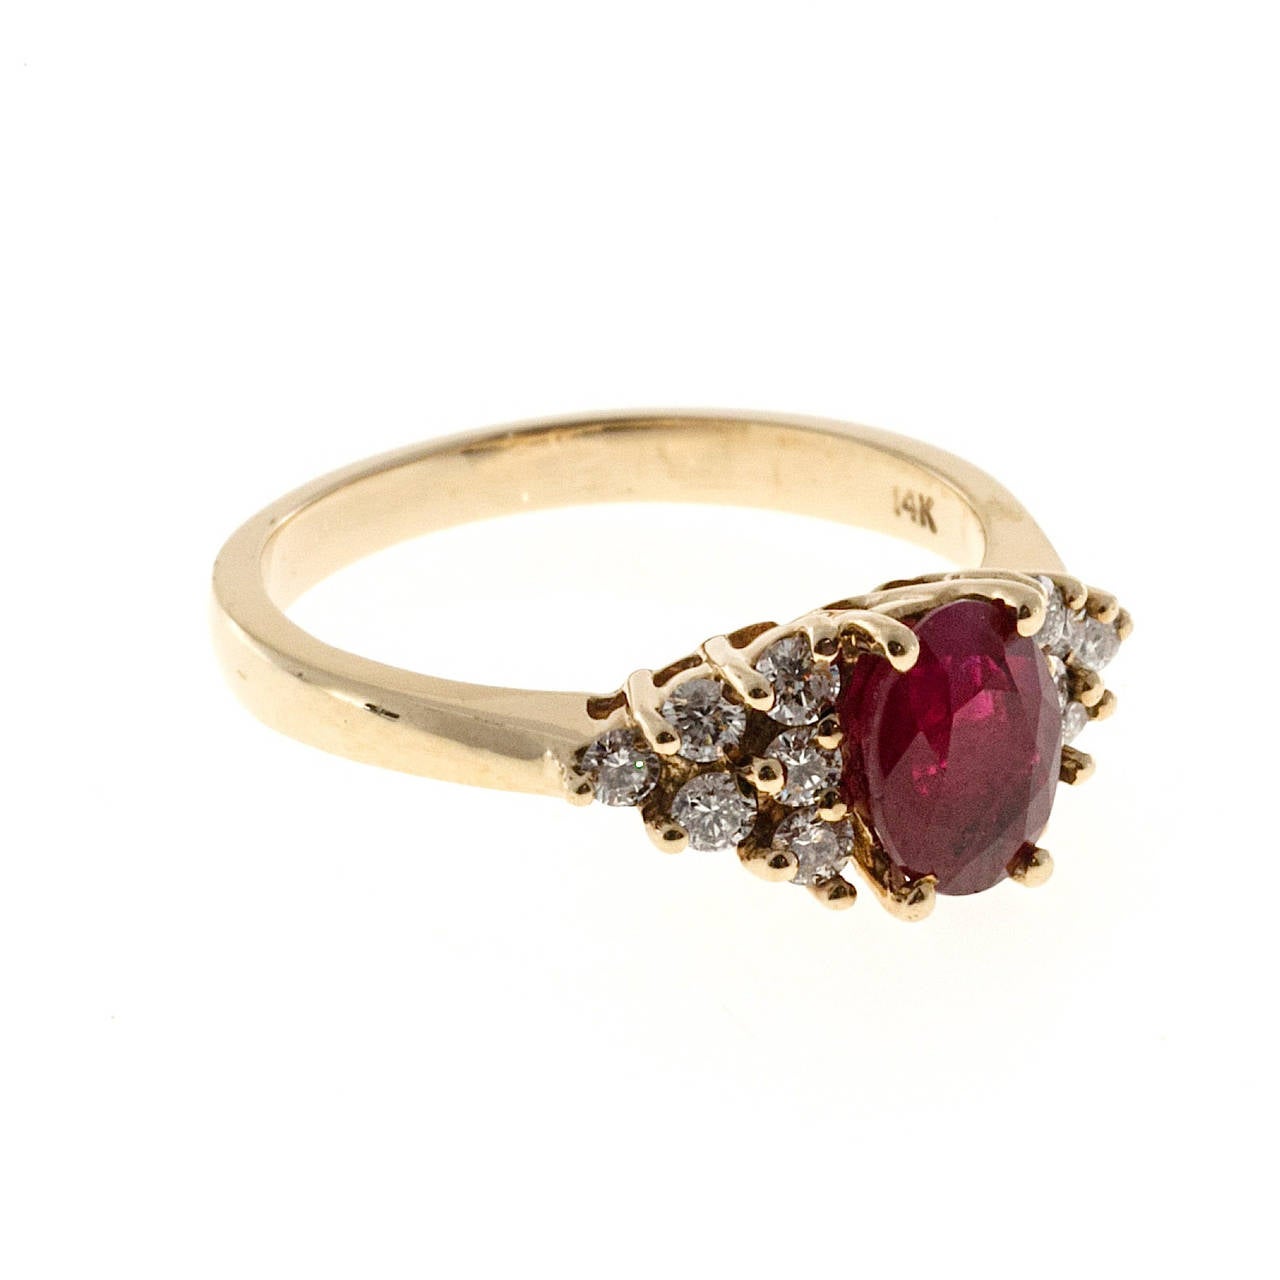 Classic style 14k yellow gold ring wire style top is set with a red brightly colored genuine ruby and six fine white full cut diamonds set in a triangular pattern on either side.

1 oval ruby approx. total weight .90cts
12 round diamonds approx.